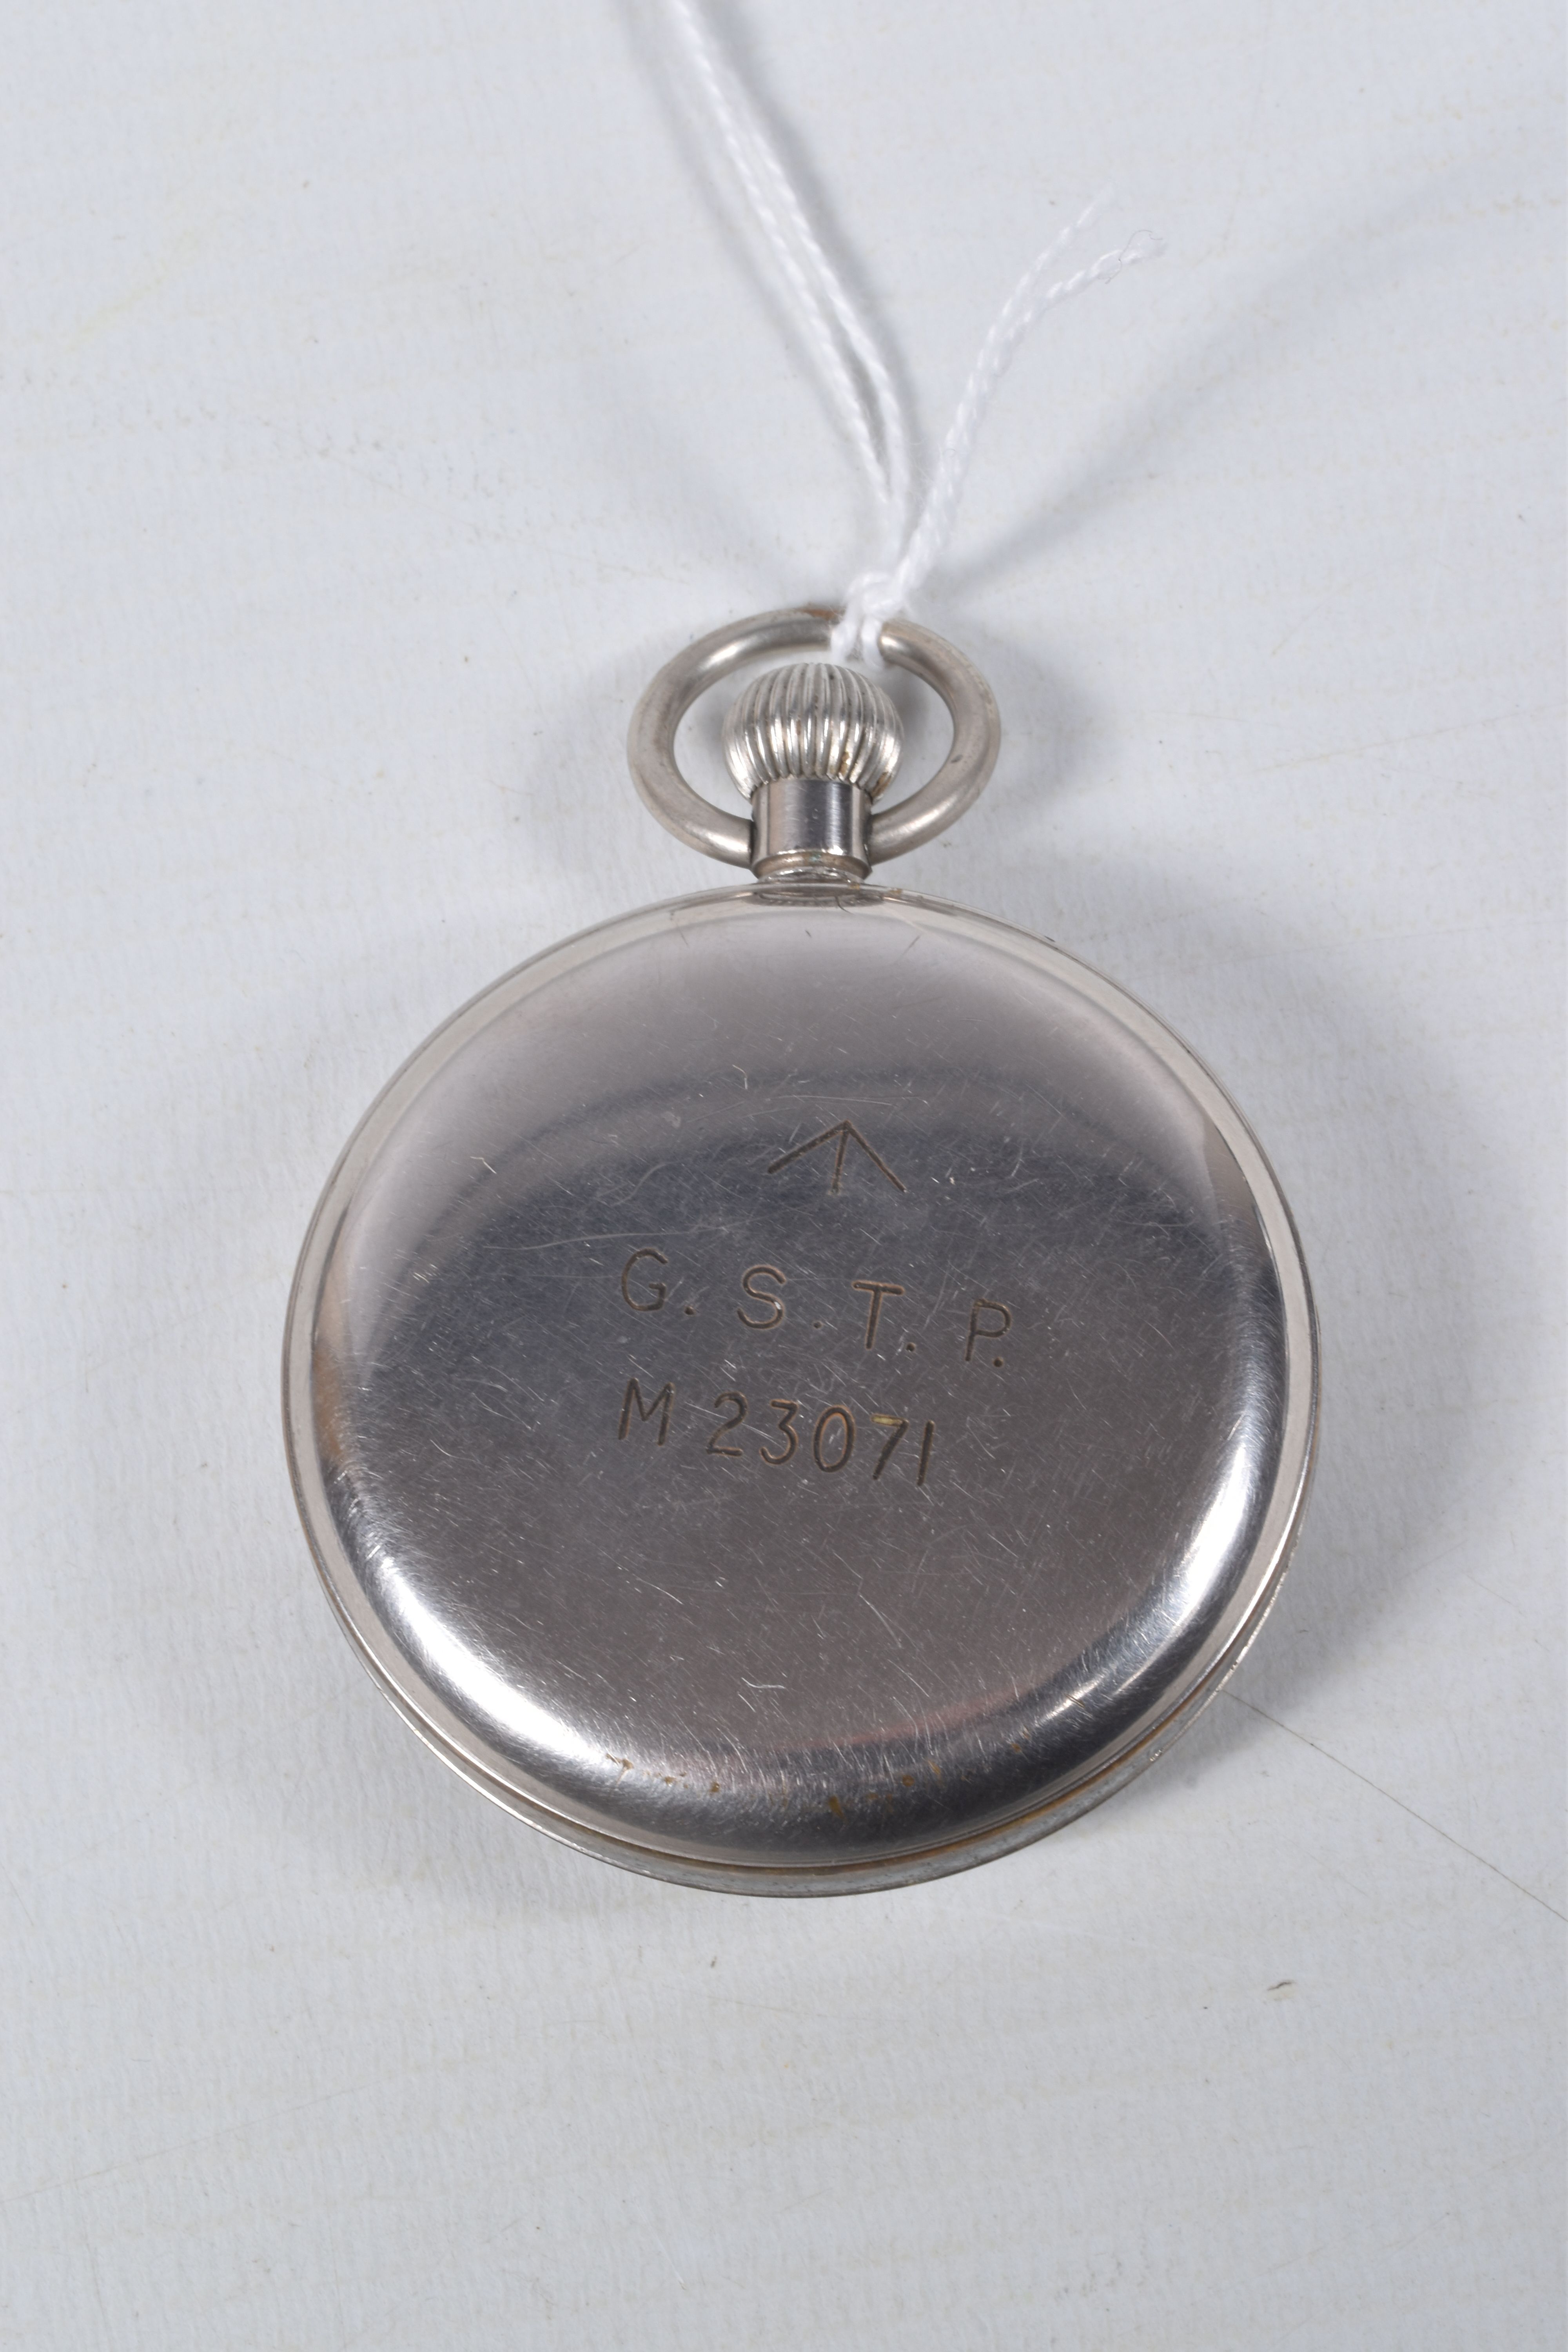 A MILITARY 'MOERIS' OPEN FACE POCKET WATCH, manual wind, round black dial signed 'Moeris', Arabic - Image 5 of 6